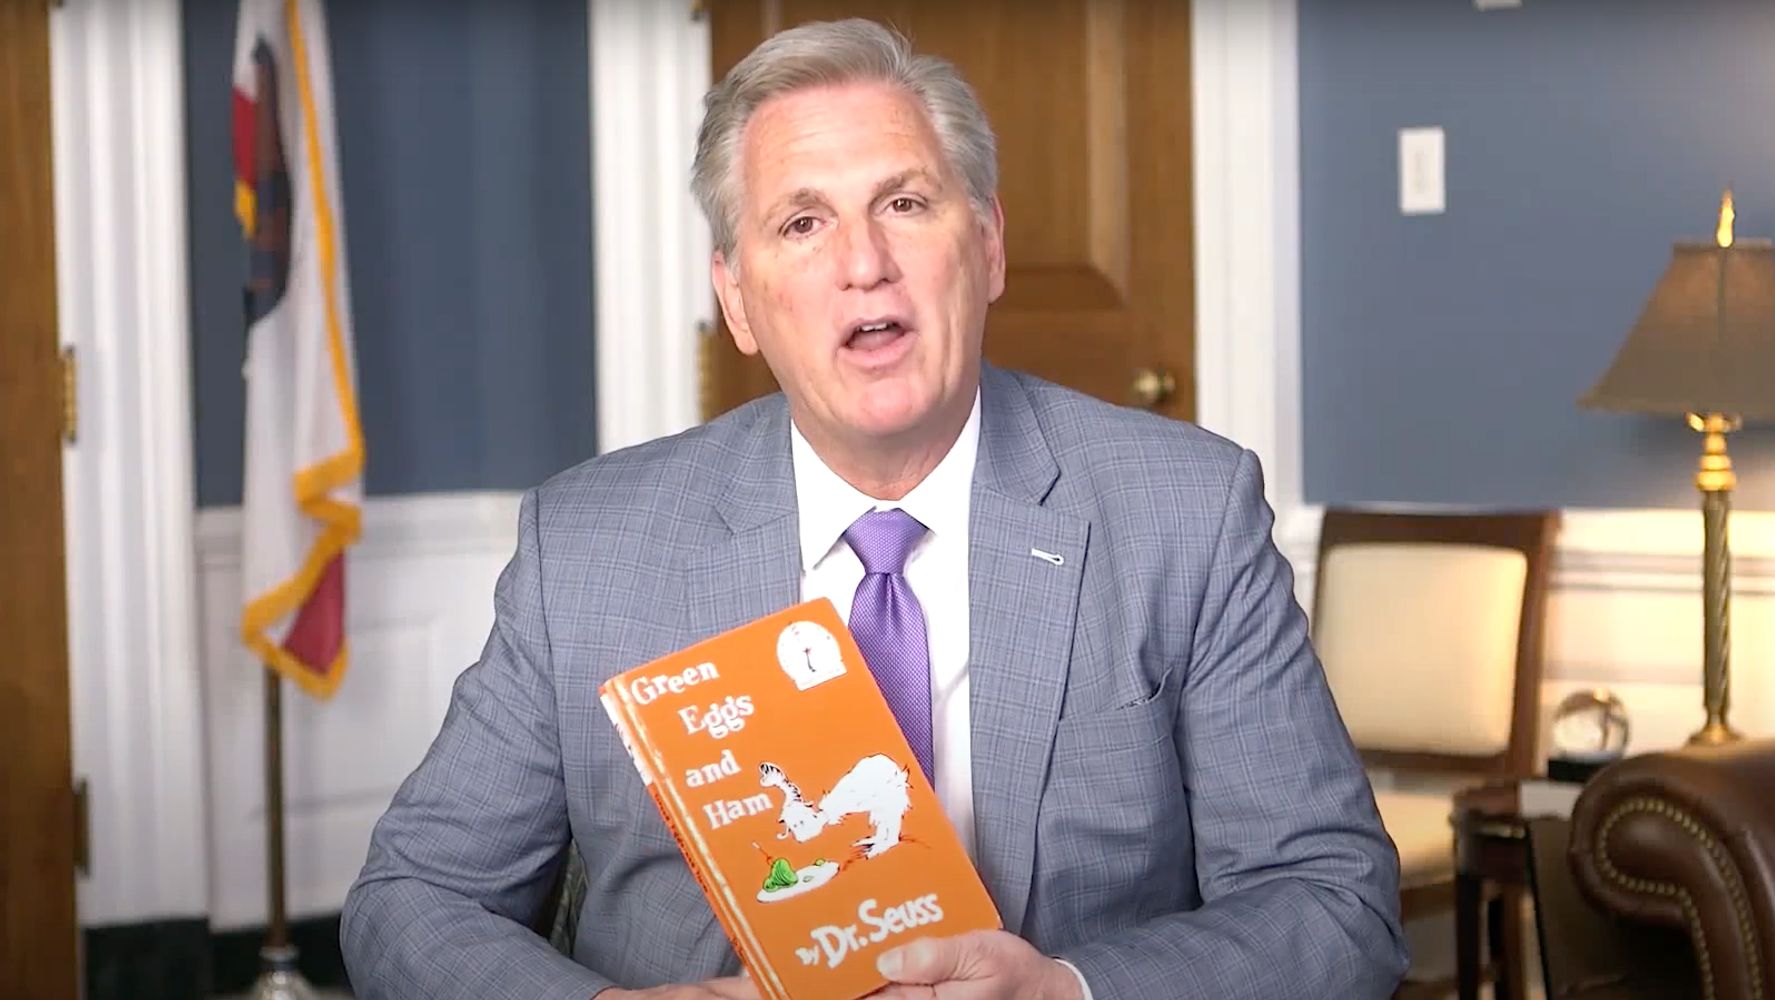 Dr. Seuss Stunt by Kevin McCarthy makes people very, very confused